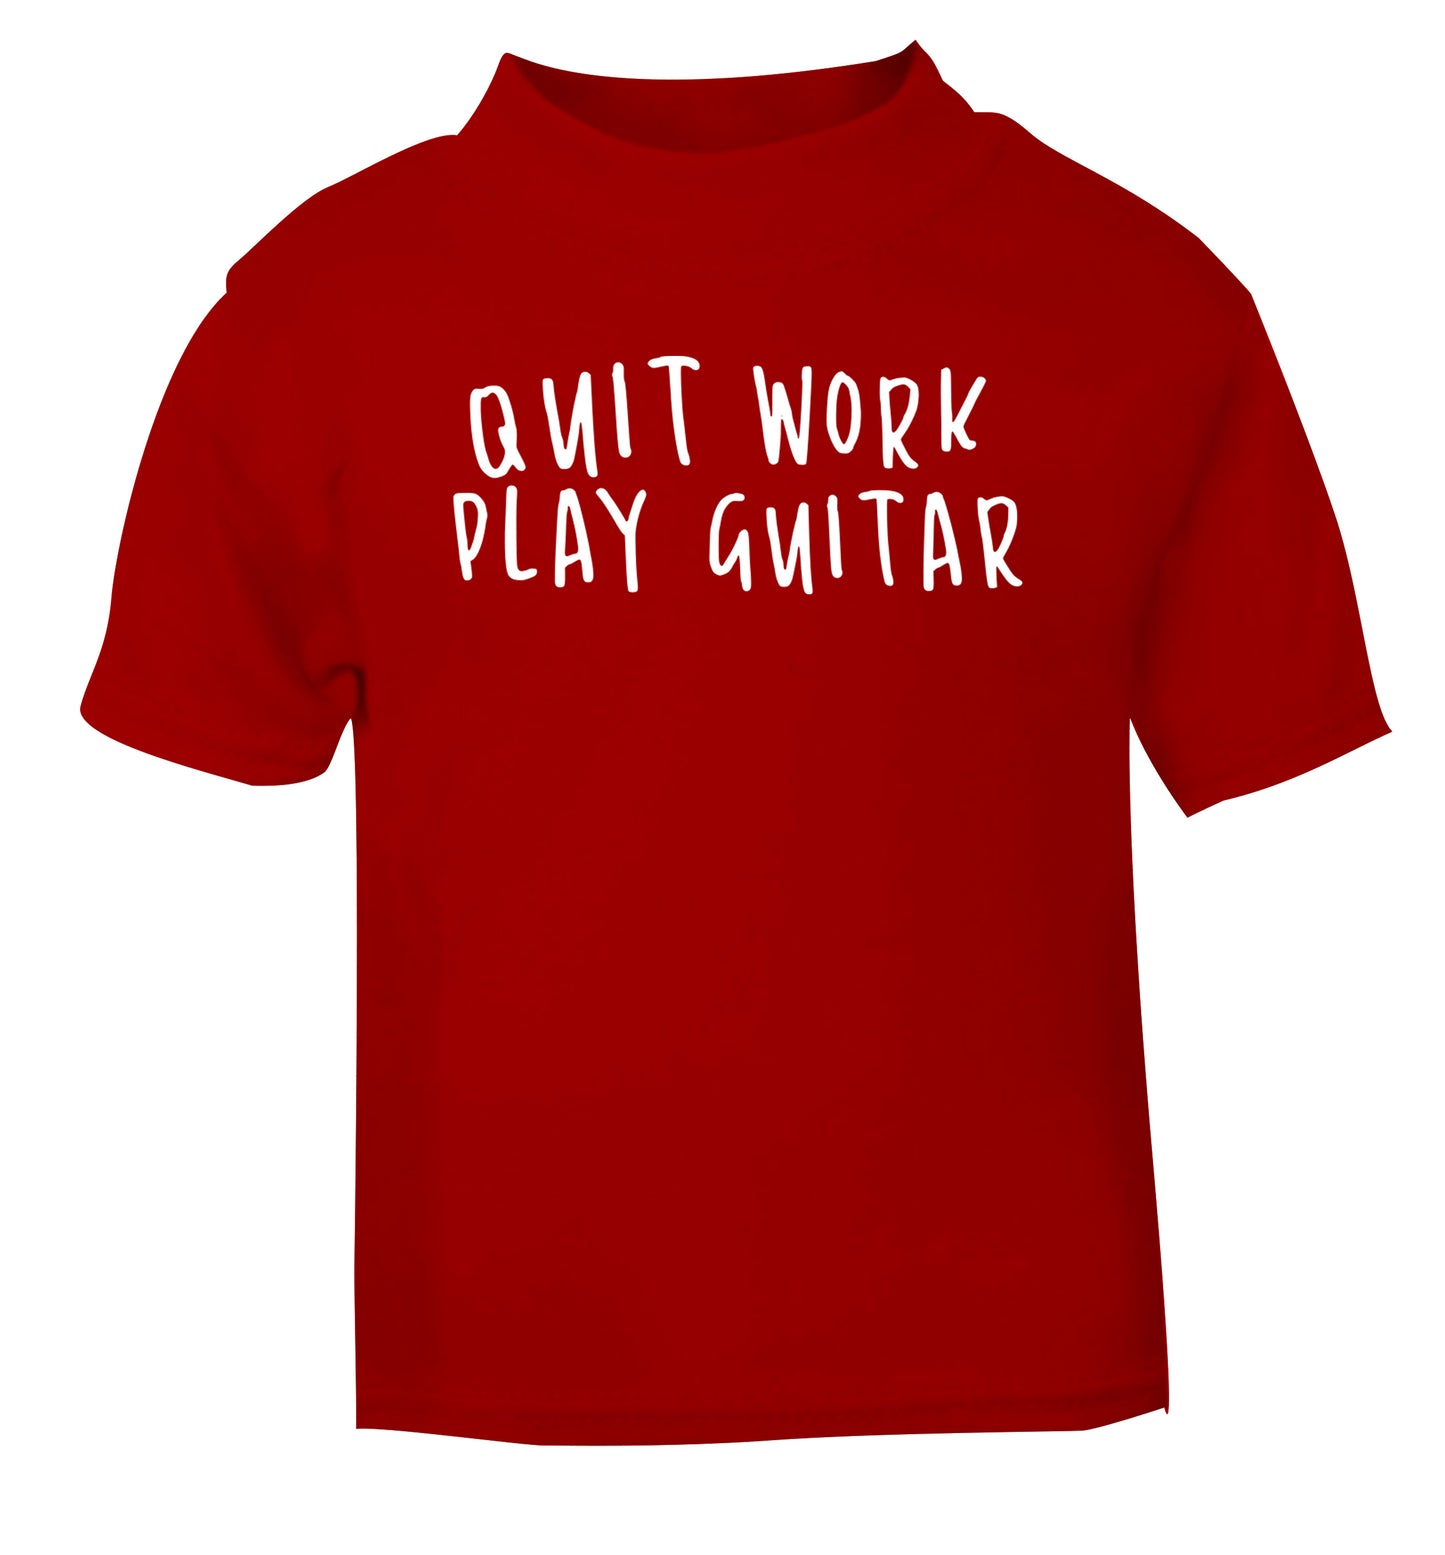 Quit work play guitar red Baby Toddler Tshirt 2 Years